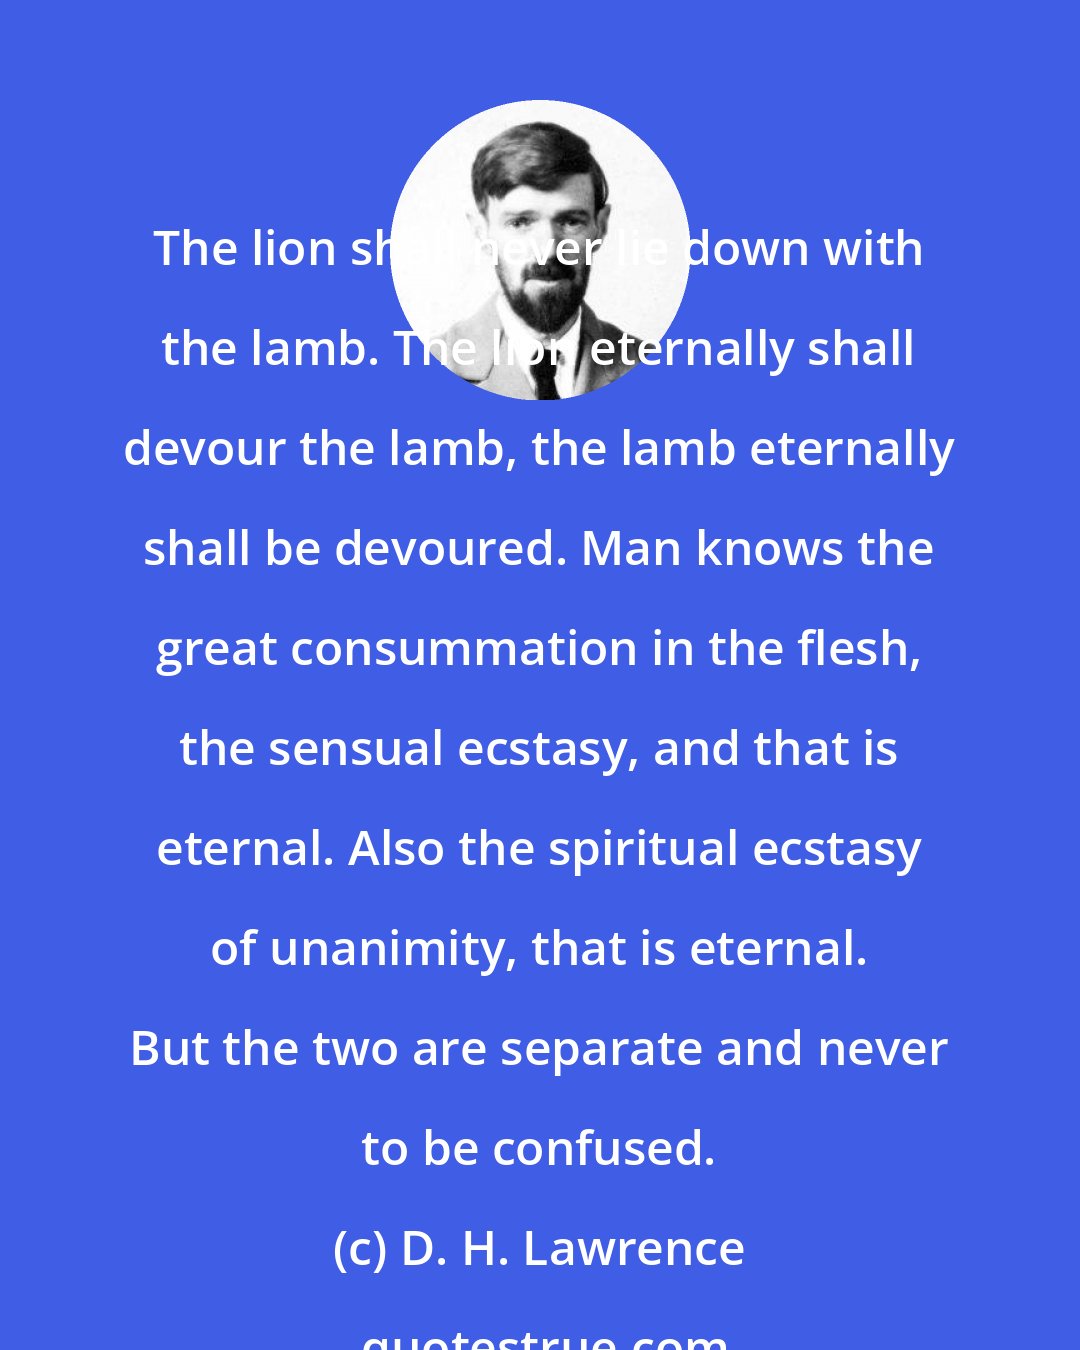 D. H. Lawrence: The lion shall never lie down with the lamb. The lion eternally shall devour the lamb, the lamb eternally shall be devoured. Man knows the great consummation in the flesh, the sensual ecstasy, and that is eternal. Also the spiritual ecstasy of unanimity, that is eternal. But the two are separate and never to be confused.